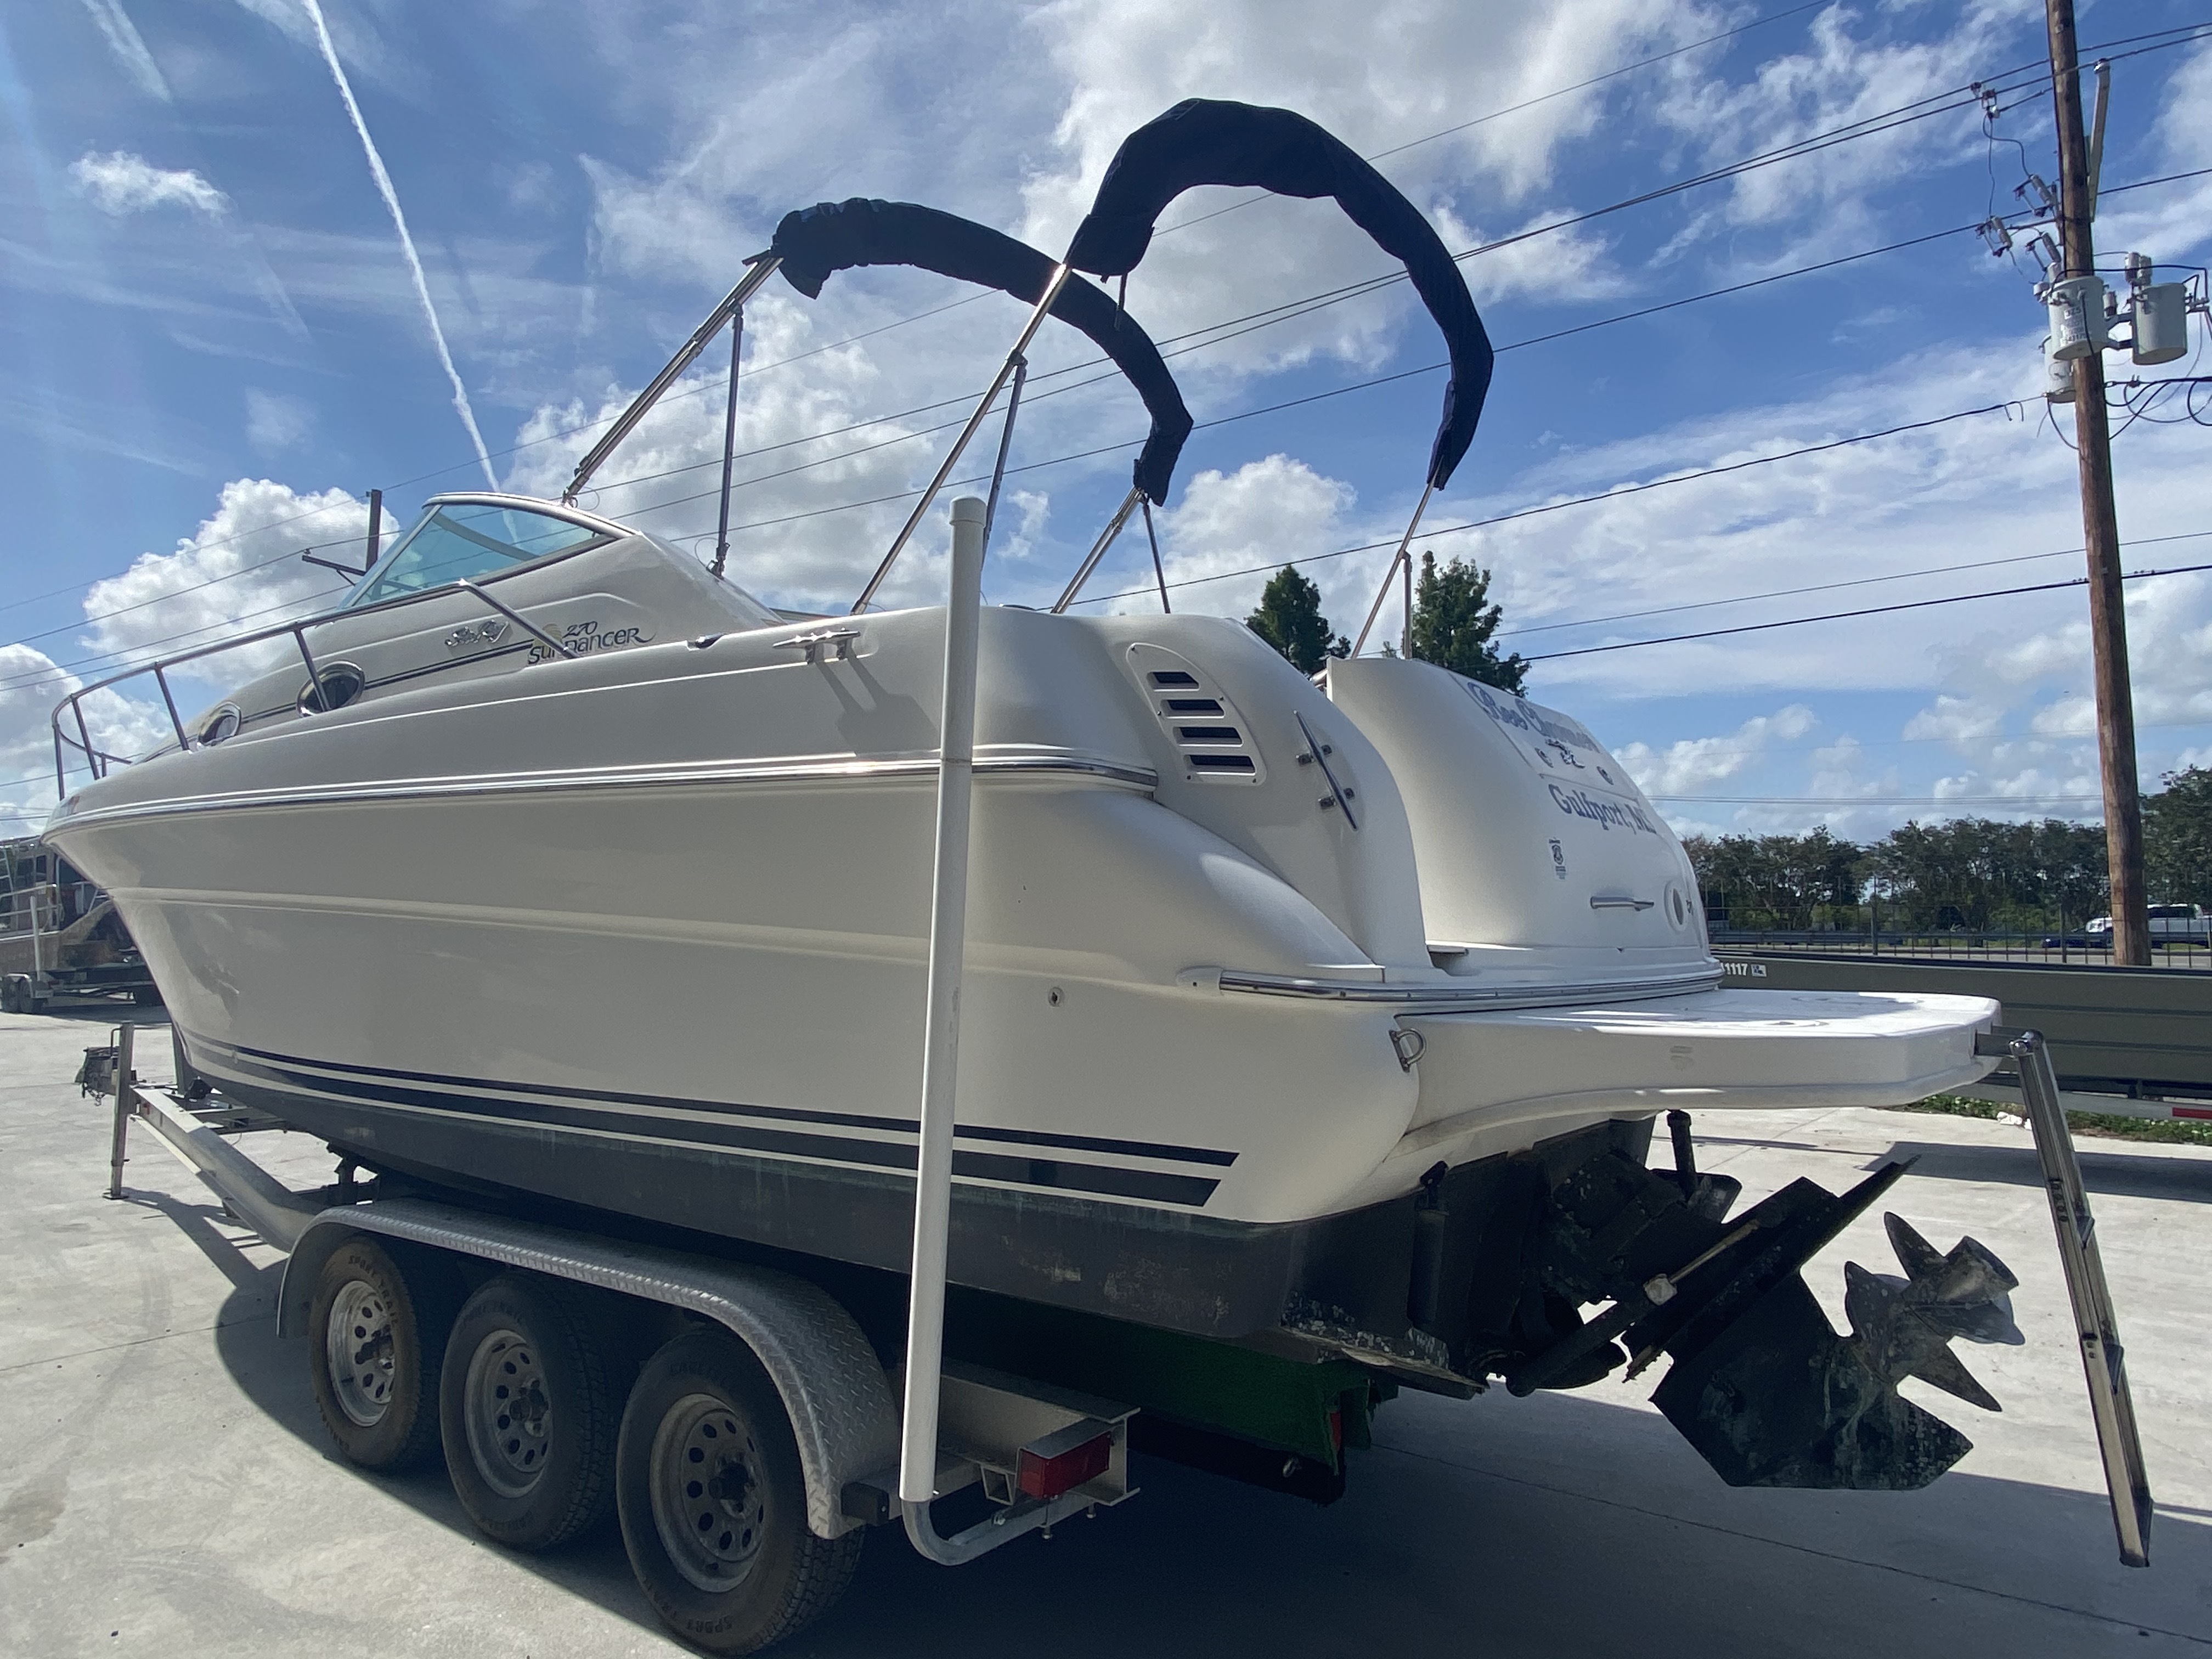 2000 Sea Ray boat for sale, model of the boat is 27 Sundancer & Image # 18 of 18